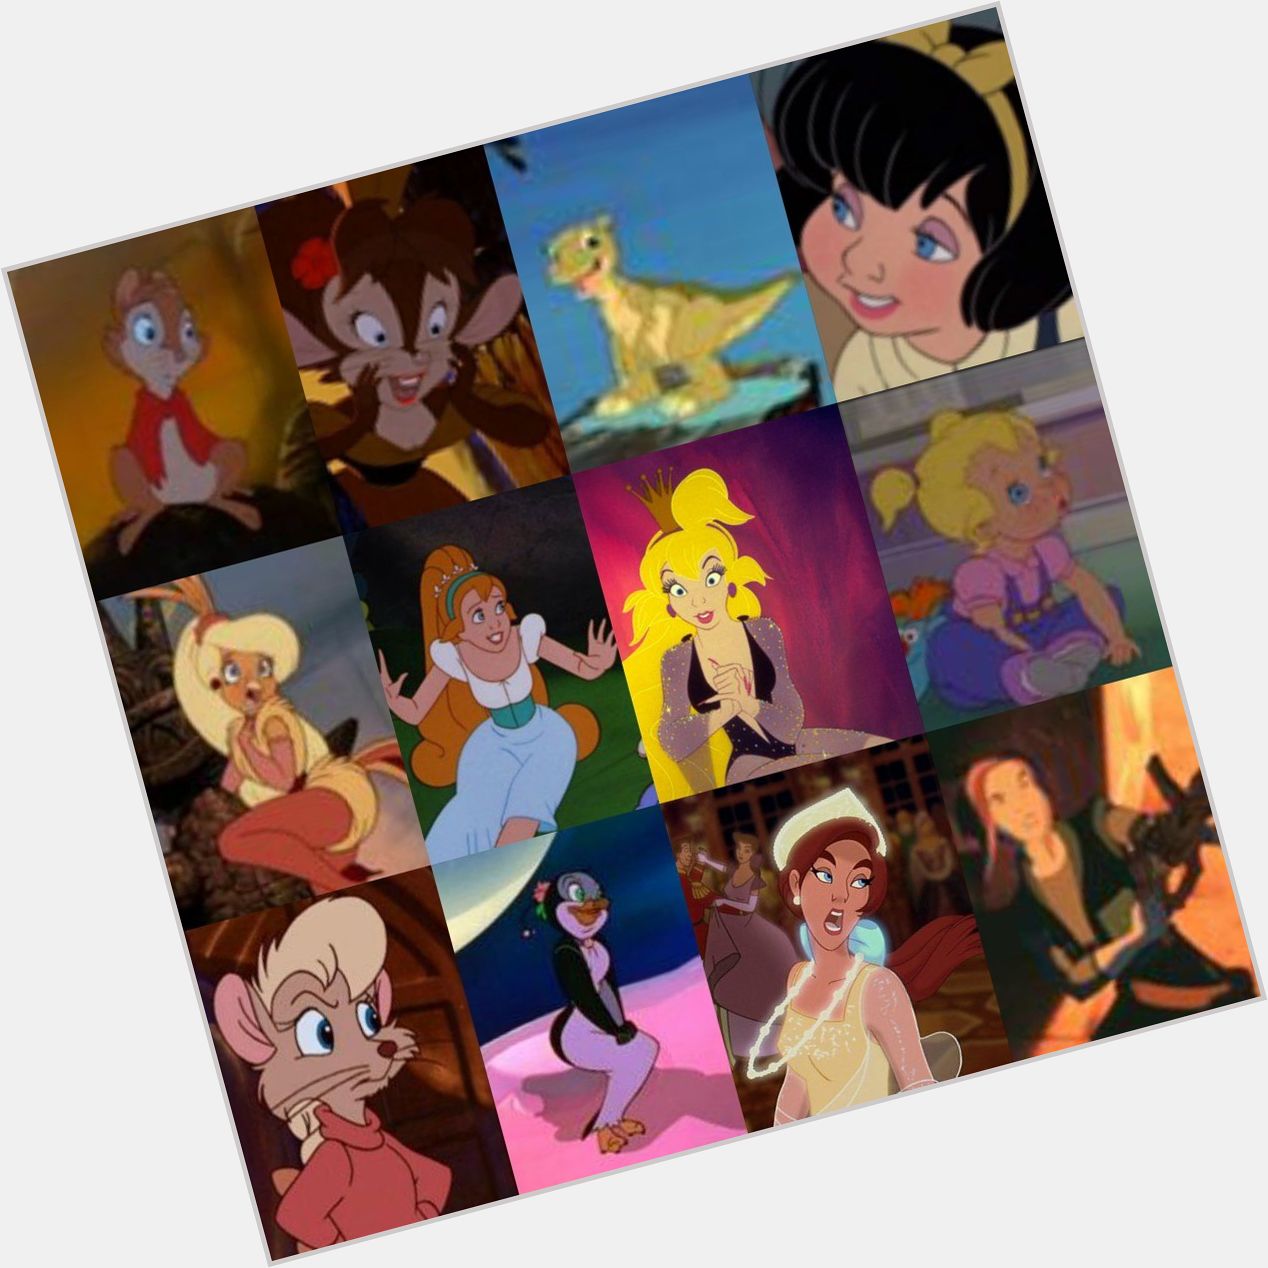 Don Bluth dating 2